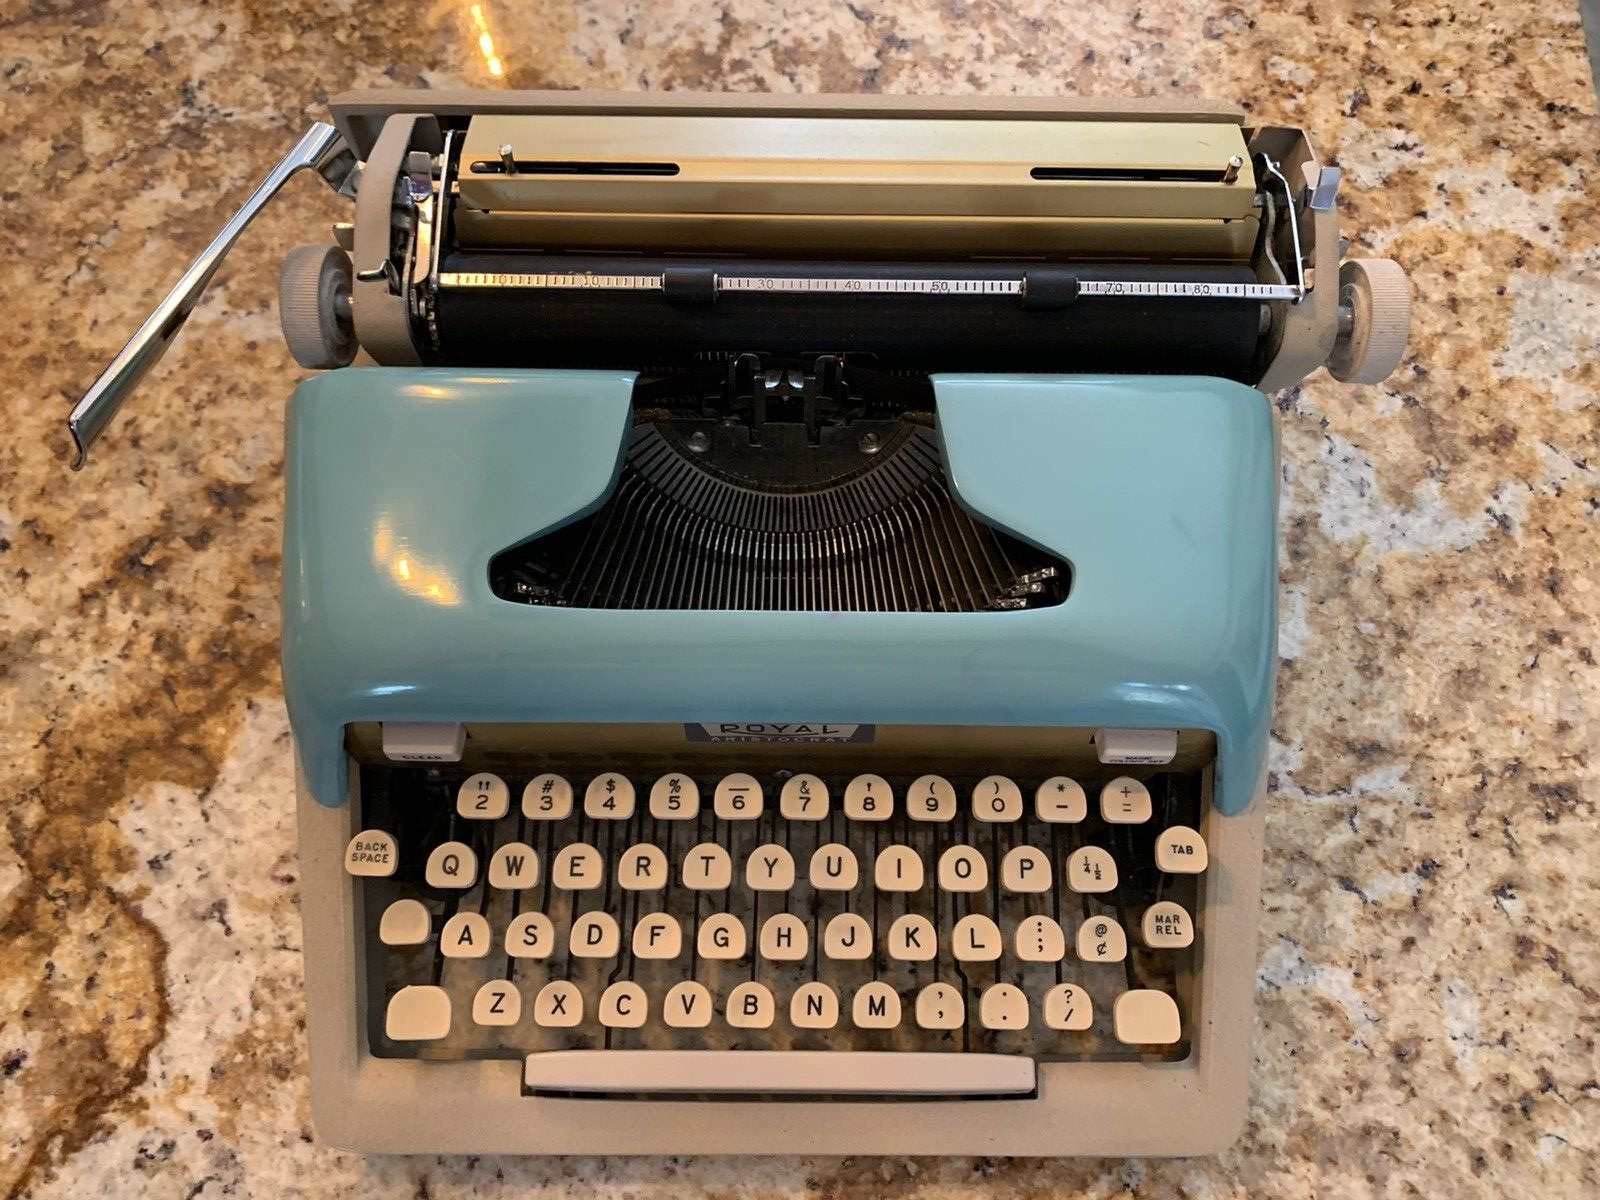 1961 Royal Aristocrat Turquoise And Gold Typewriter With Case Beautiful